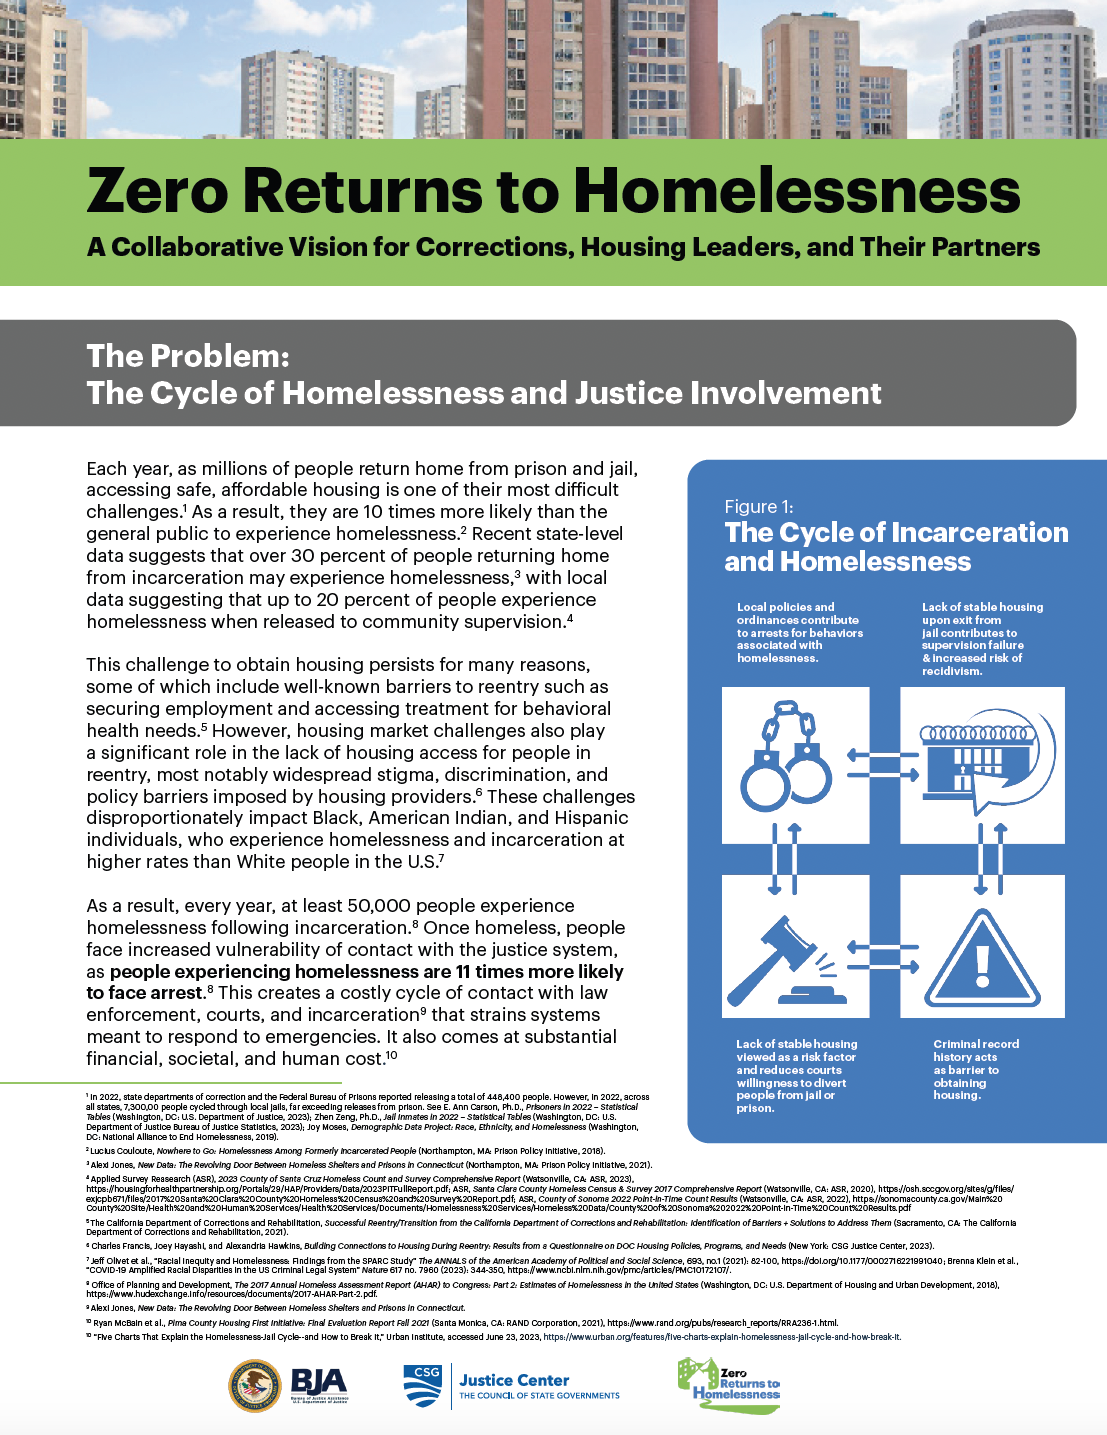 Zero Returns to Homelessness Initiative Launched